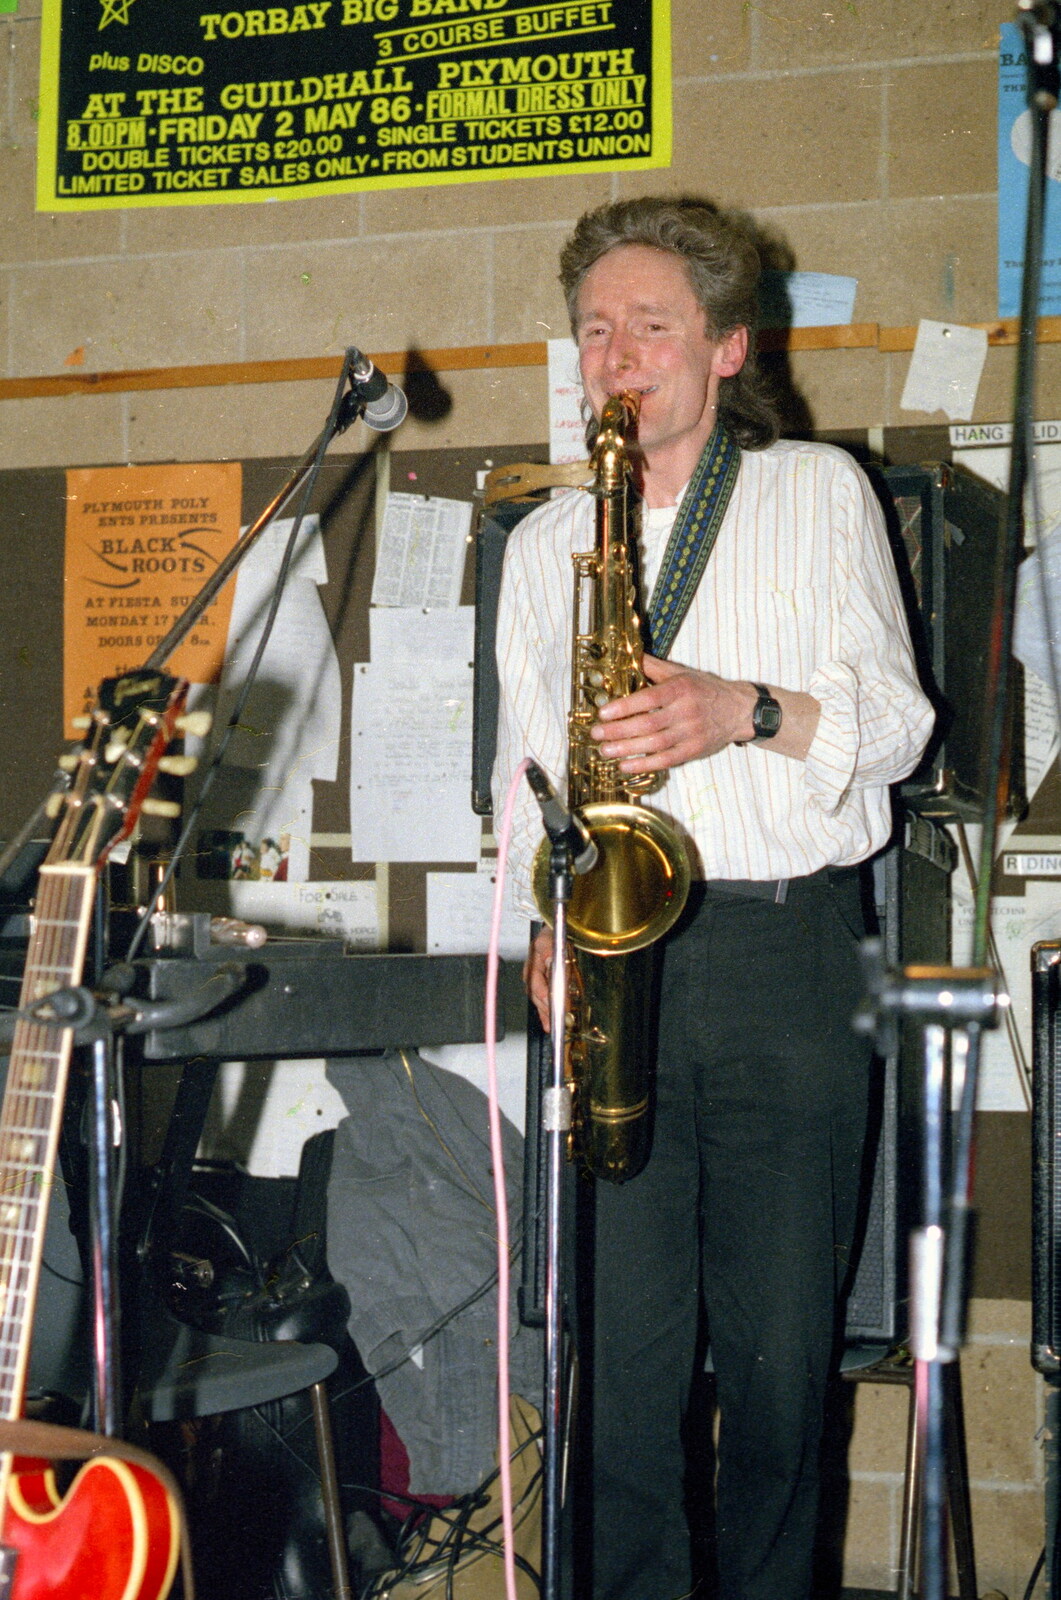 A saxophone moment from Uni: The End of Term and Whitsand Bay, Plymouth and New Milton - 21st March 1986